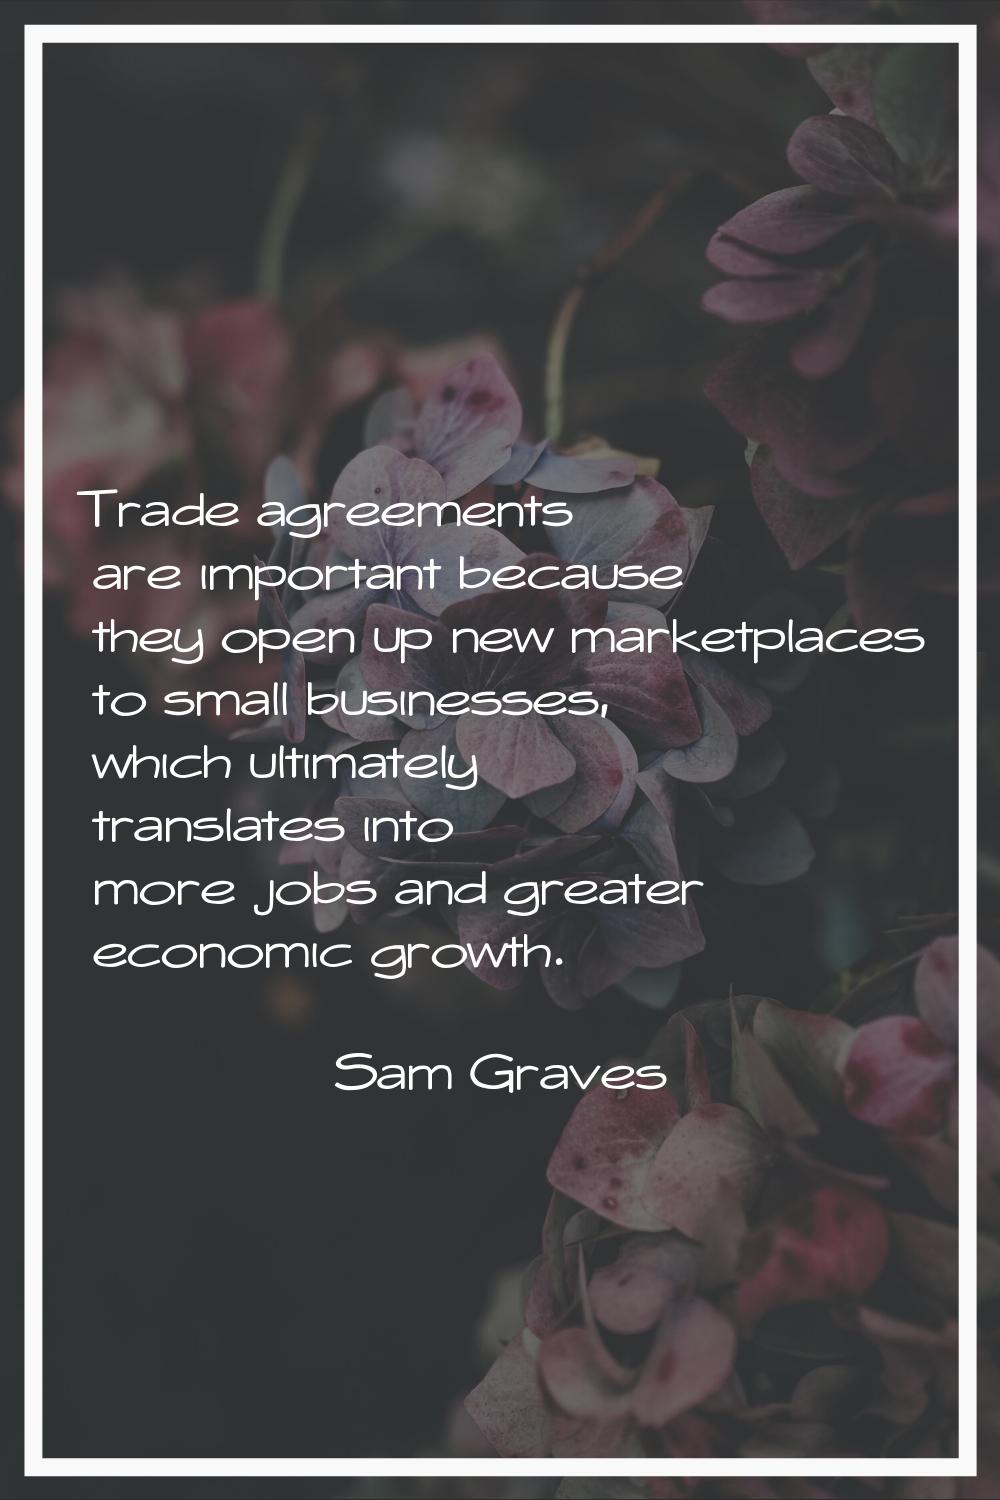 Trade agreements are important because they open up new marketplaces to small businesses, which ult